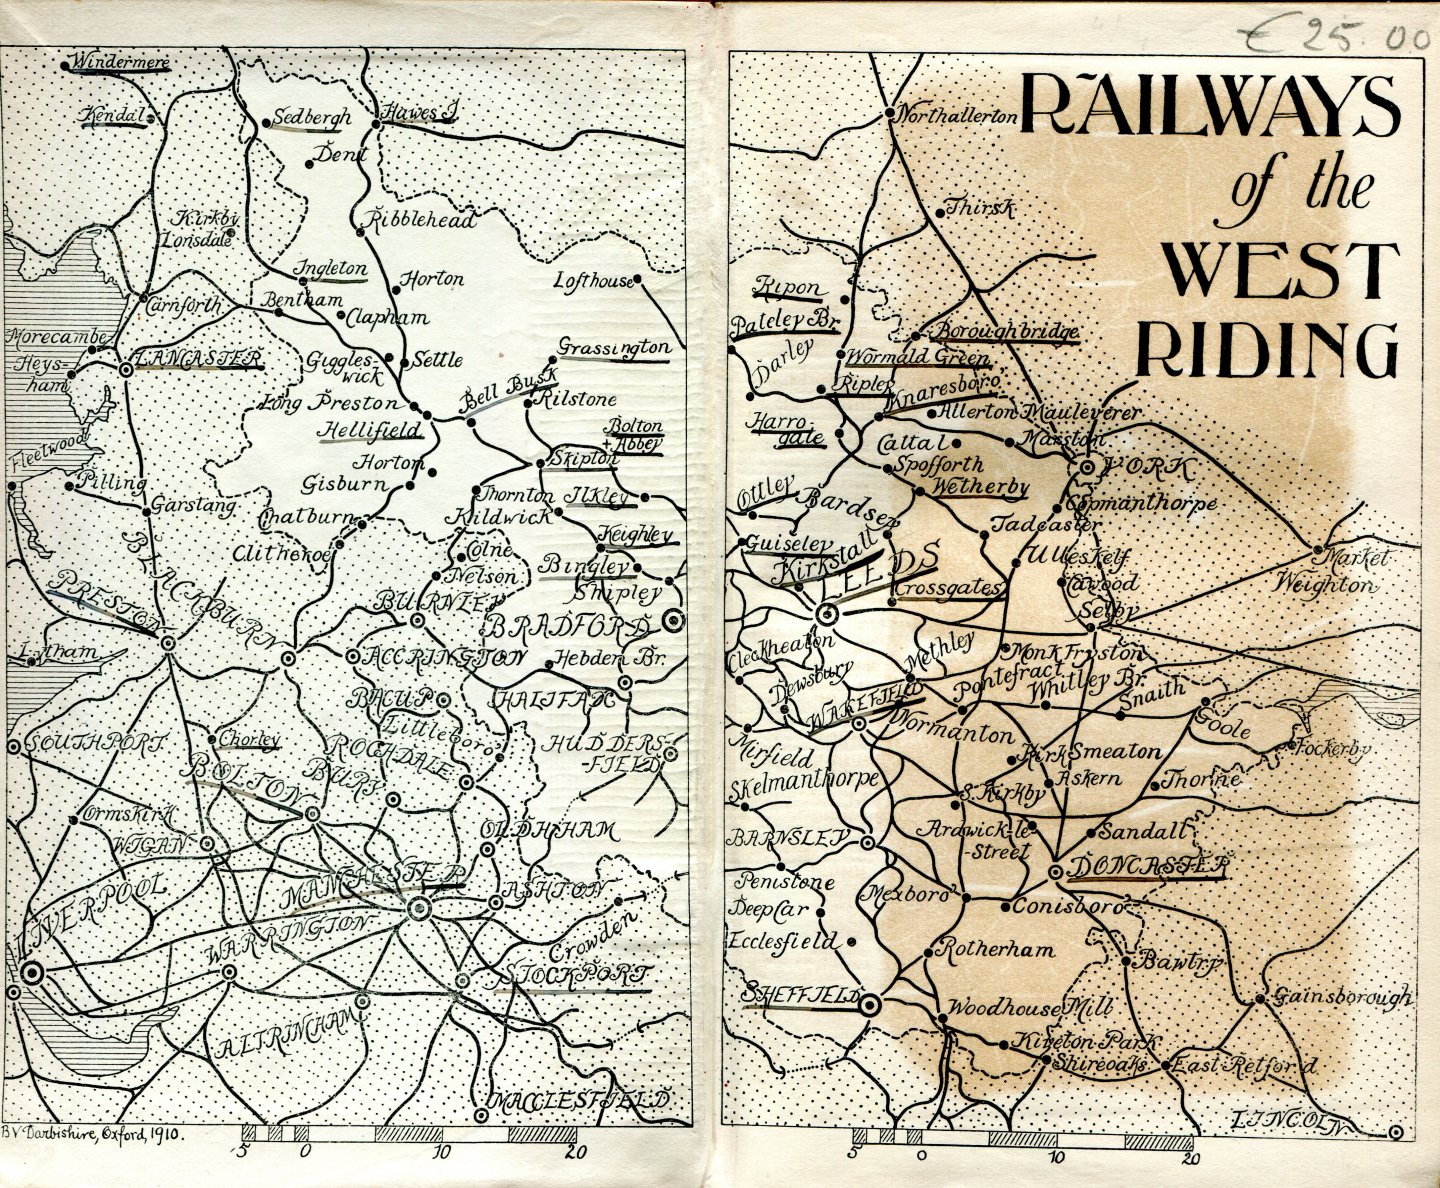 Morris, Joseph E. (ds1214) - The West Riding of Yorkshire. Railways of the West Riding.